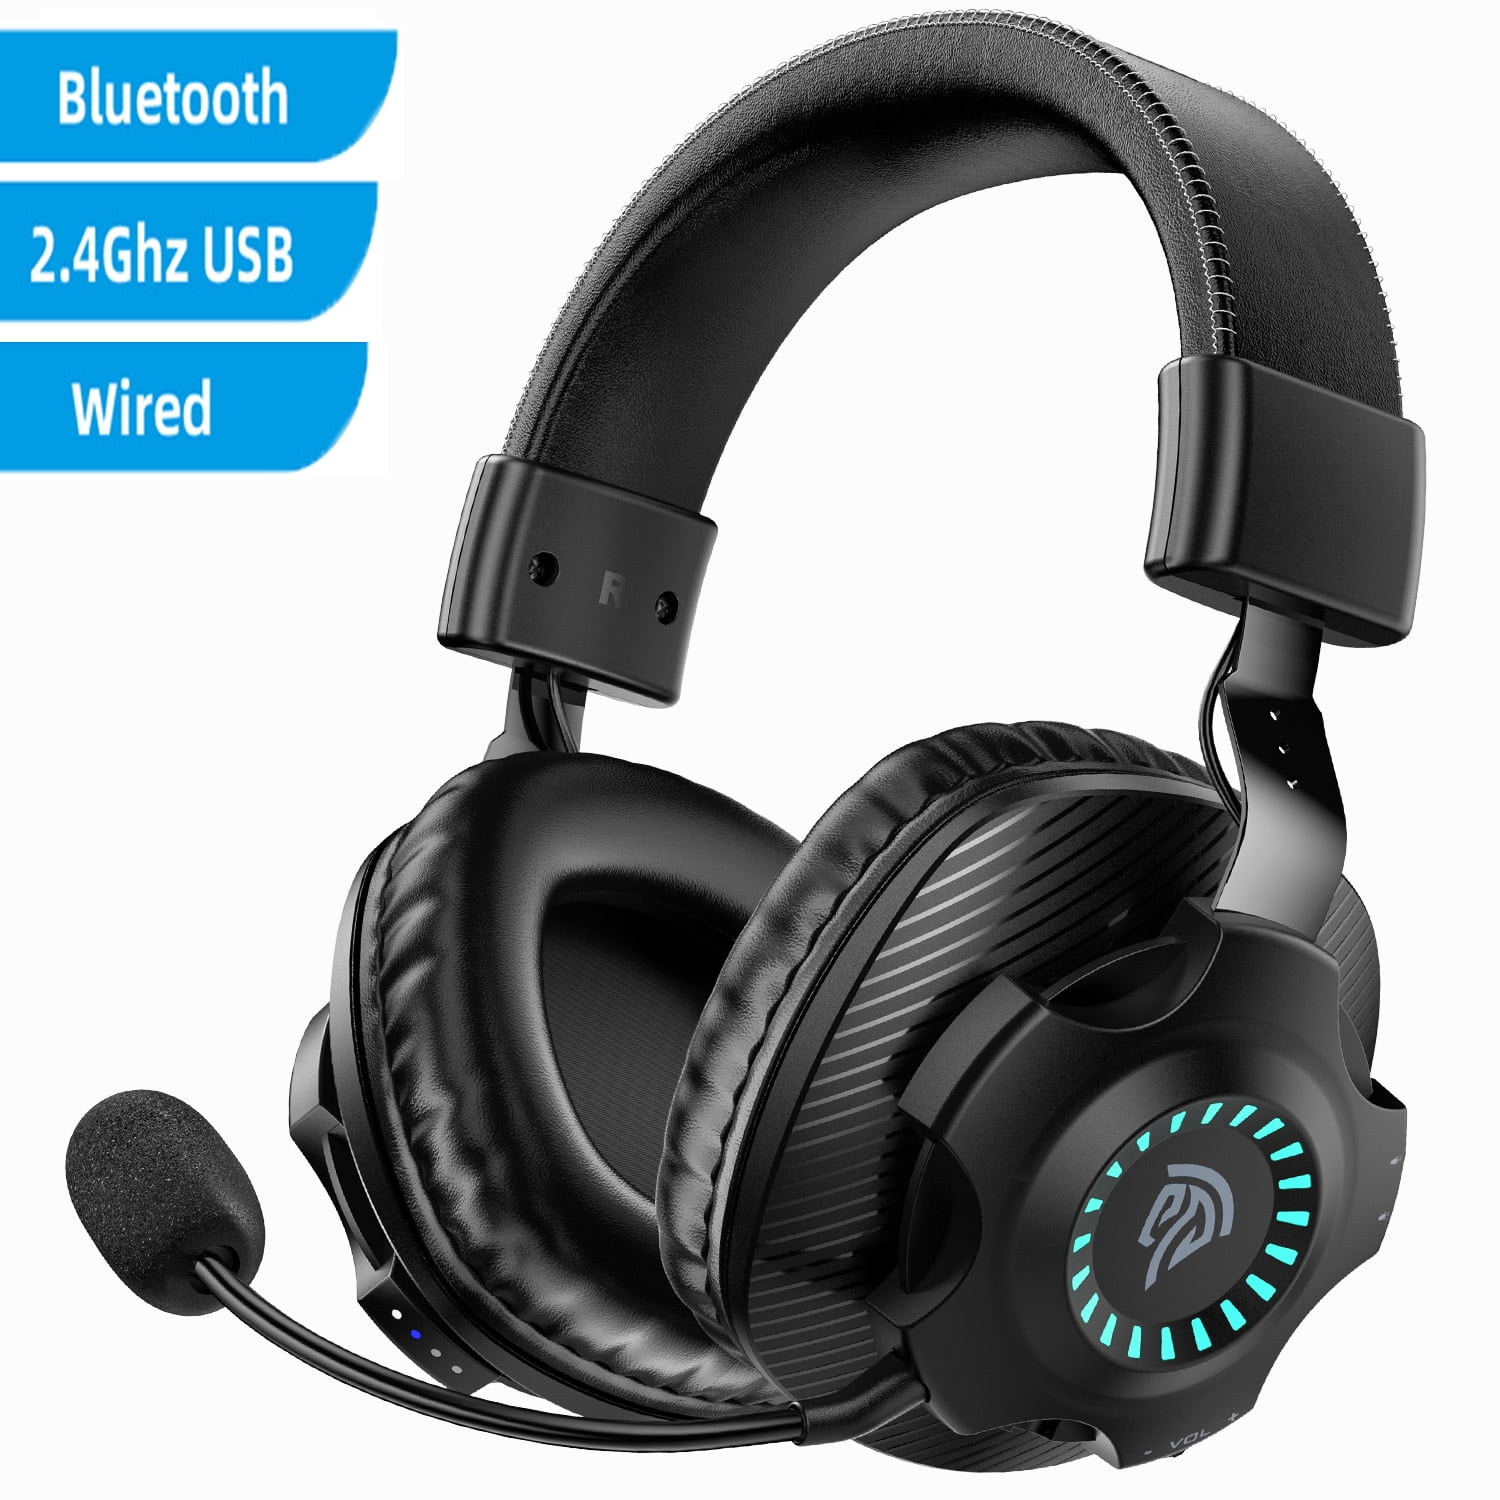 Original P2961 Wireless Bluetooth Headset, 5.0 Sport Noise Reduction  Headsets, Stereo Sound, for Phone PC Gaming Earpiece on Head, 300mAh 